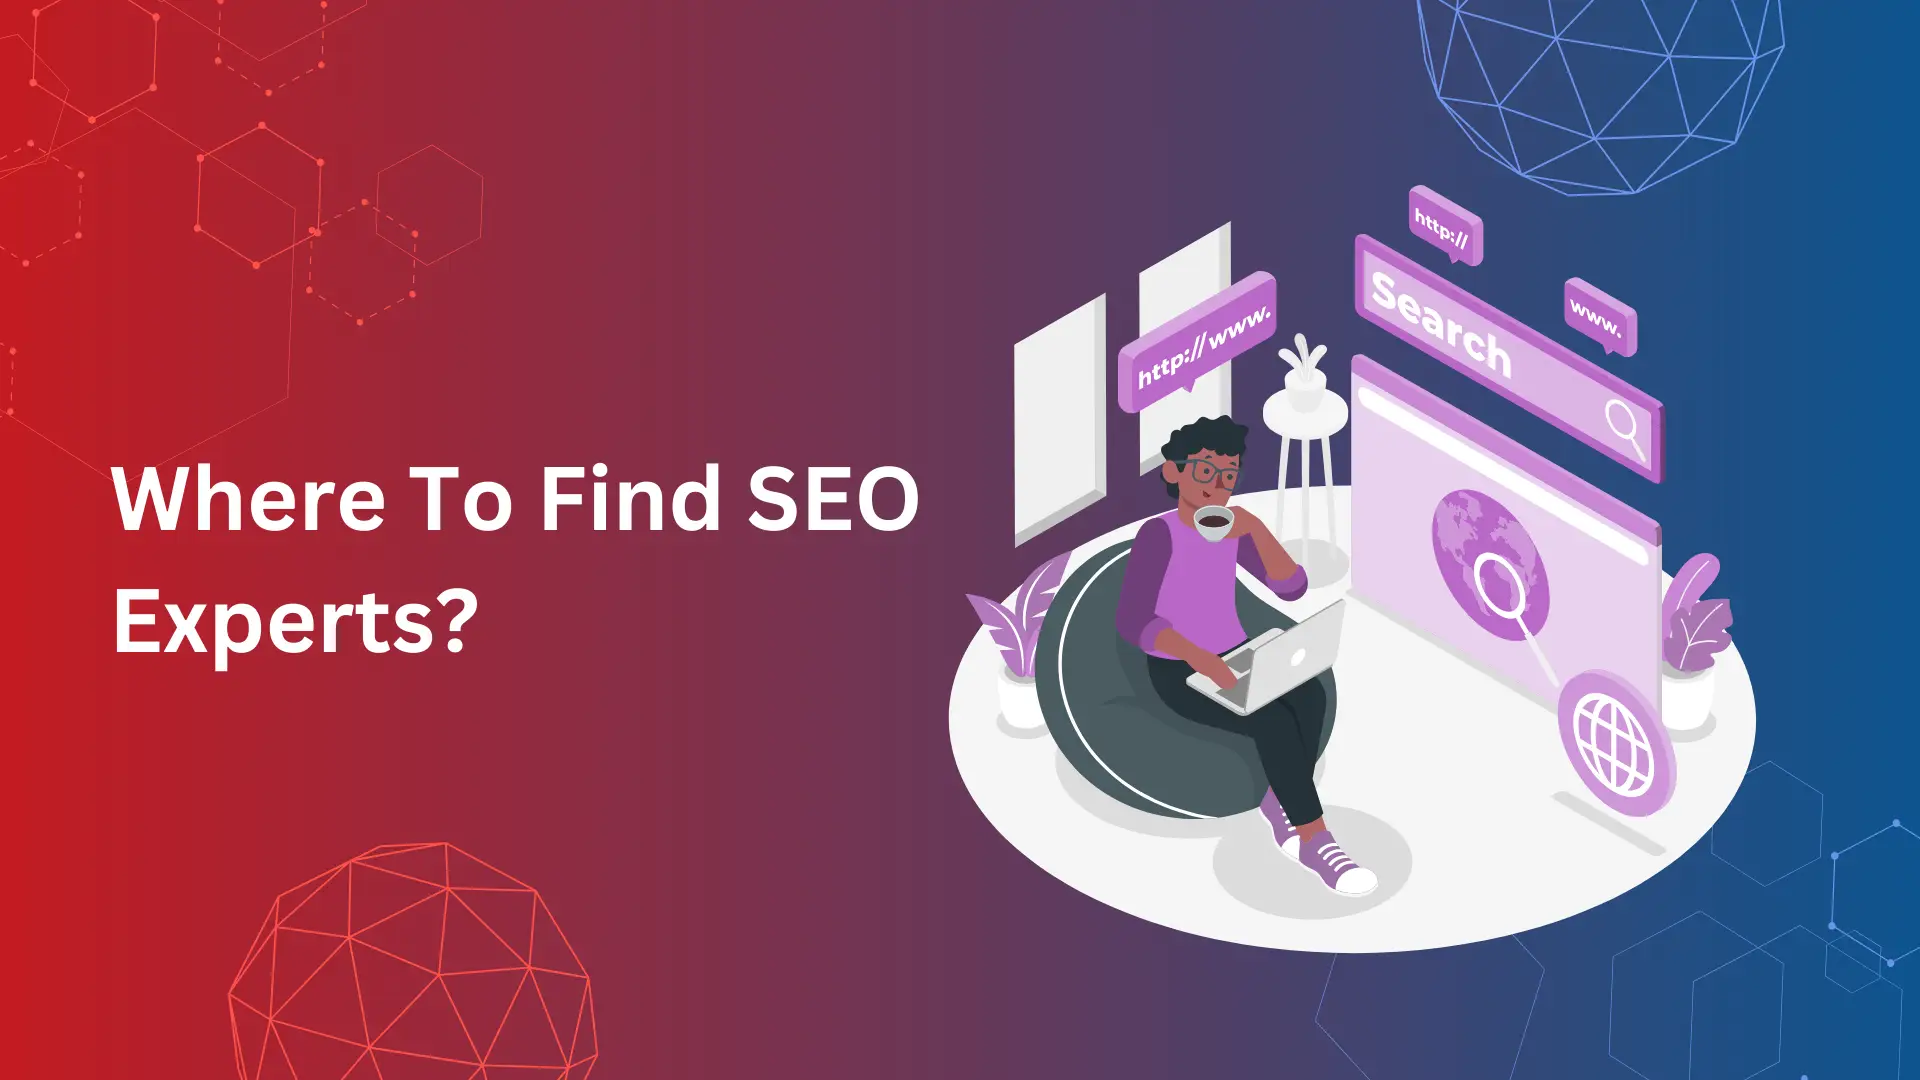 Where To Find SEO Experts?